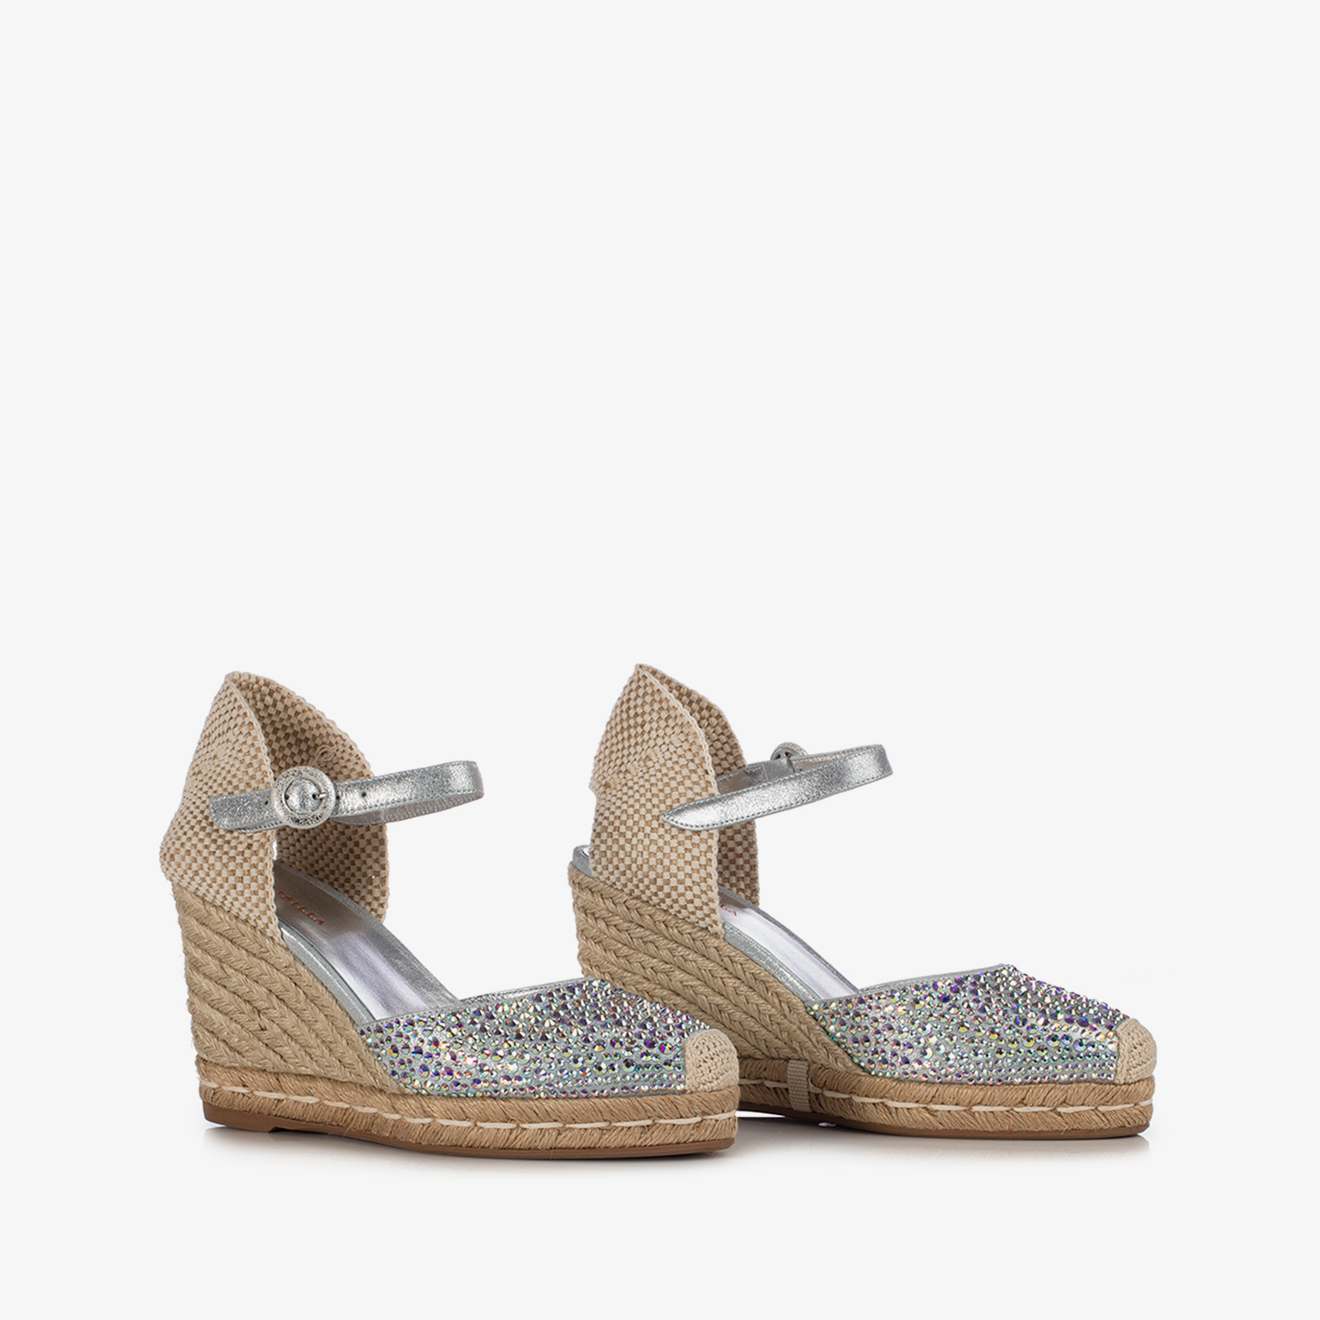 PRINCE ESPADRILLA 90 mm - Le Silla official outlet